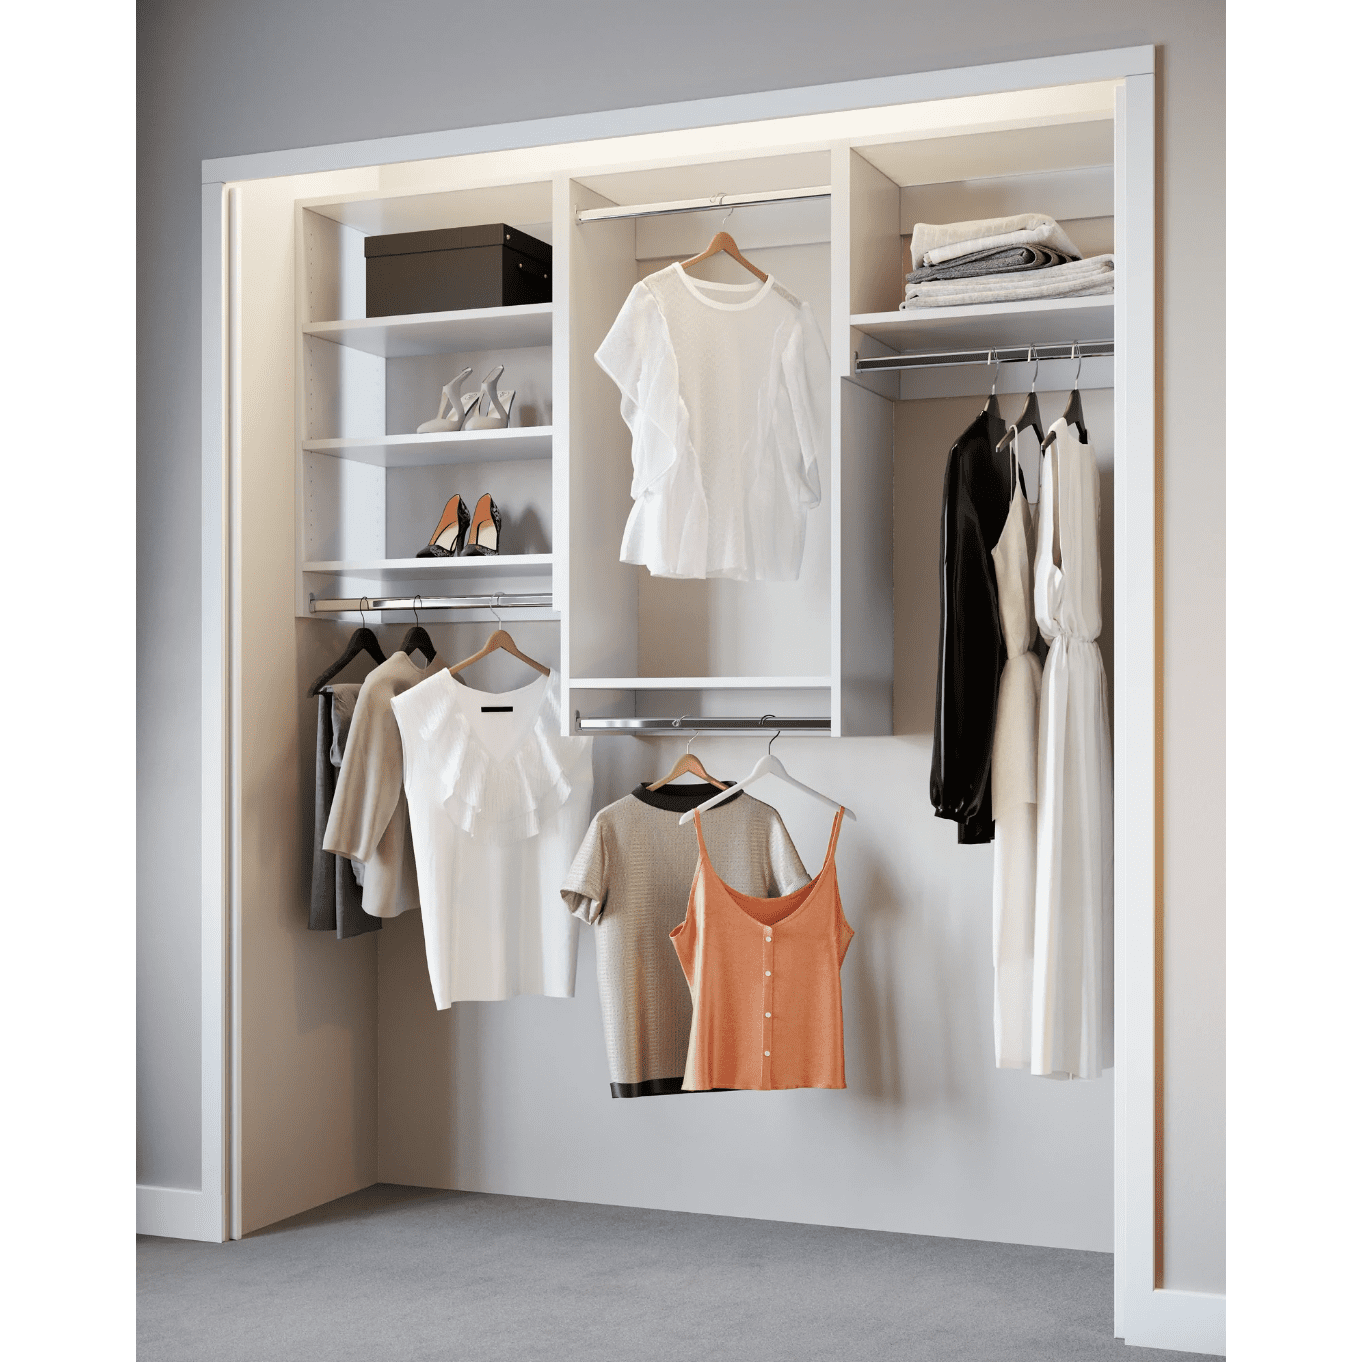 Our new closet system - The House That Lars Built